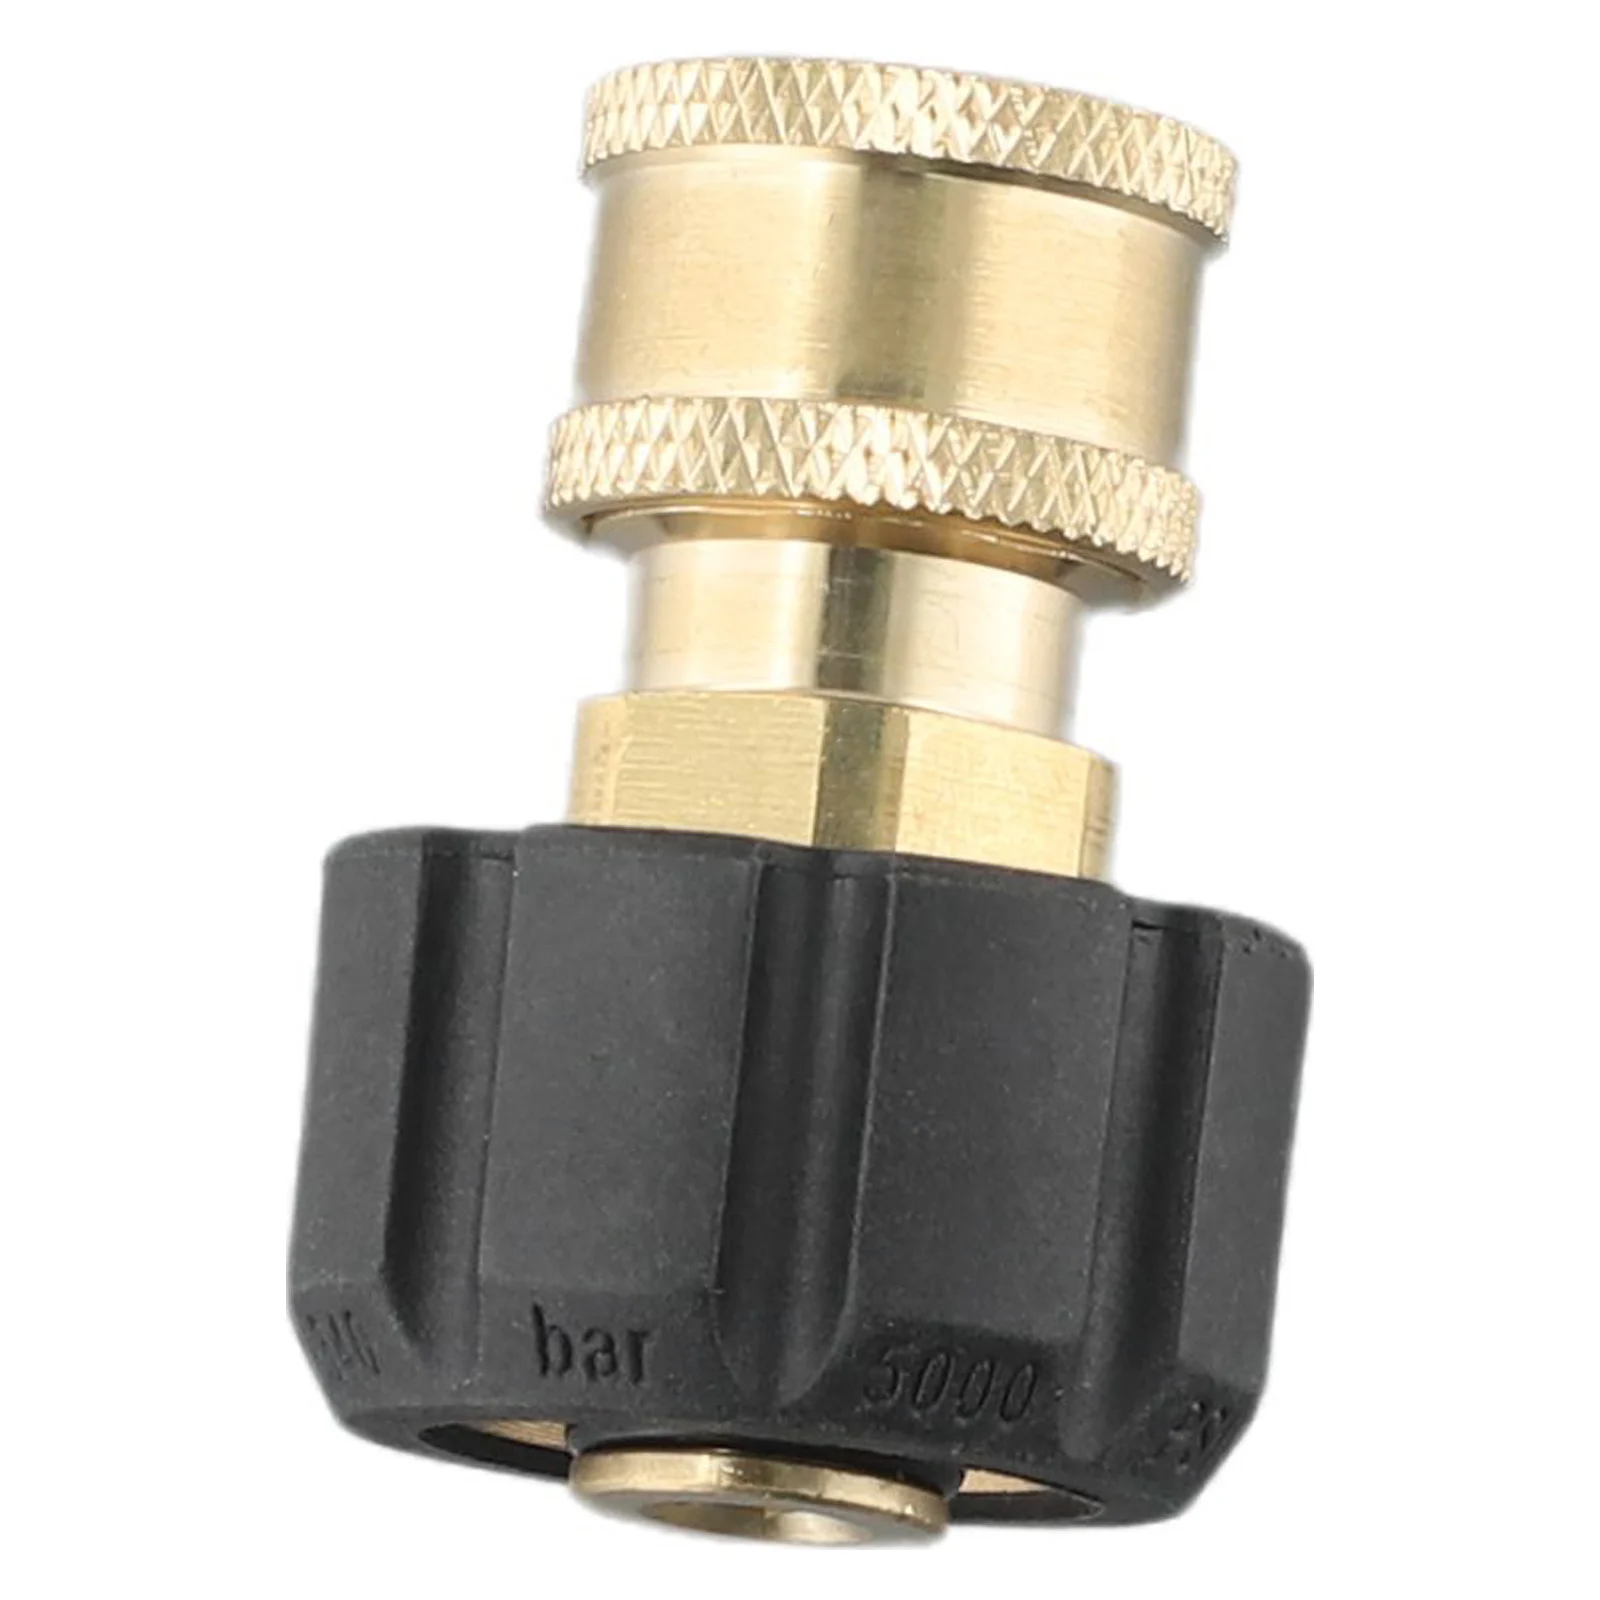 

Copper 1/4 Inch High Pressure Quick Connector Car Washer Adapter Water Gun Hydraulic Couplers Couplings M22 14mm Female